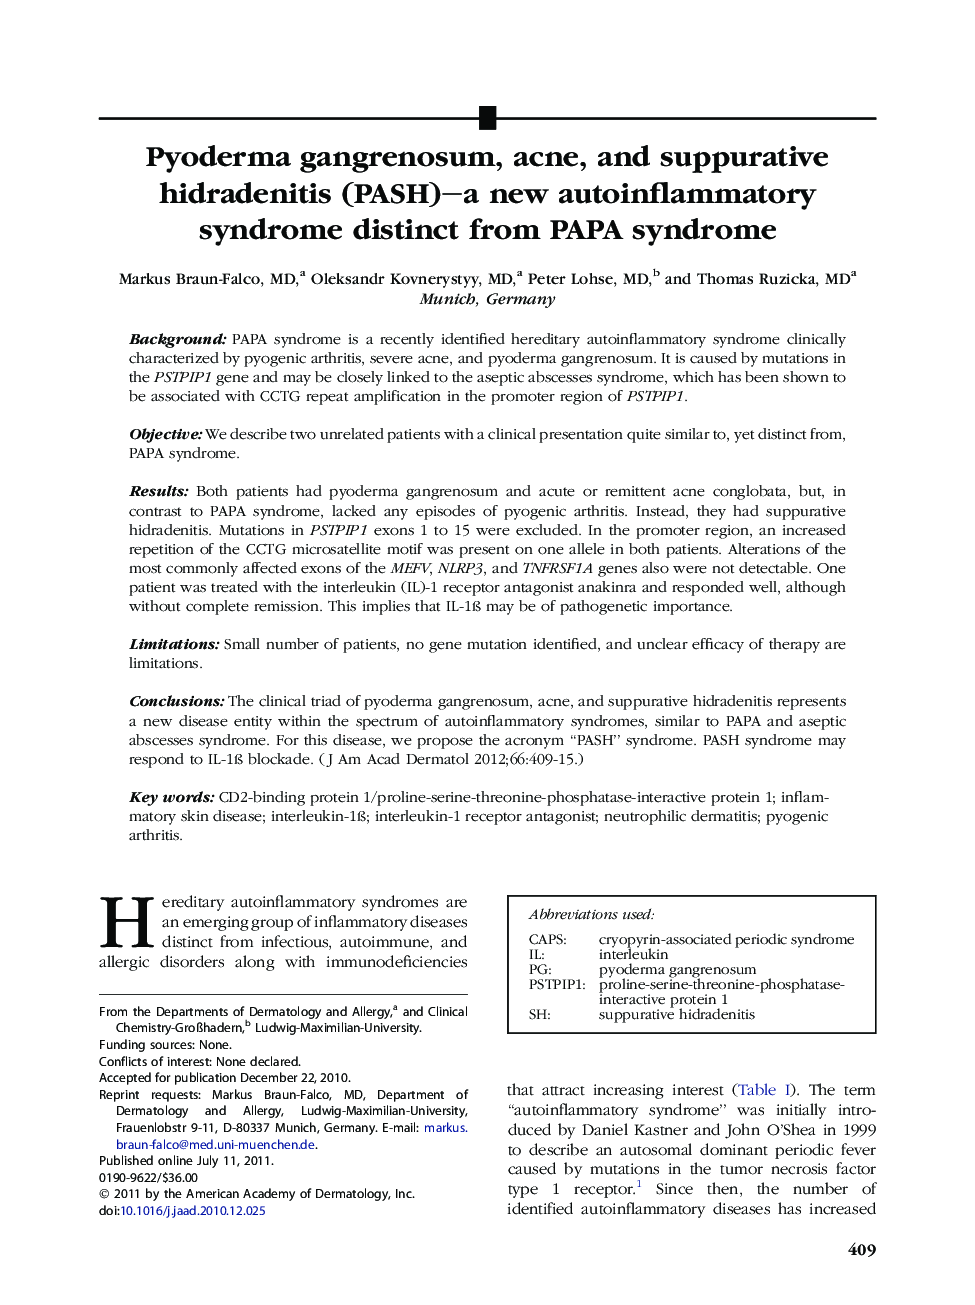 Pyoderma gangrenosum, acne, and suppurative hidradenitis (PASH)–a new autoinflammatory syndrome distinct from PAPA syndrome 